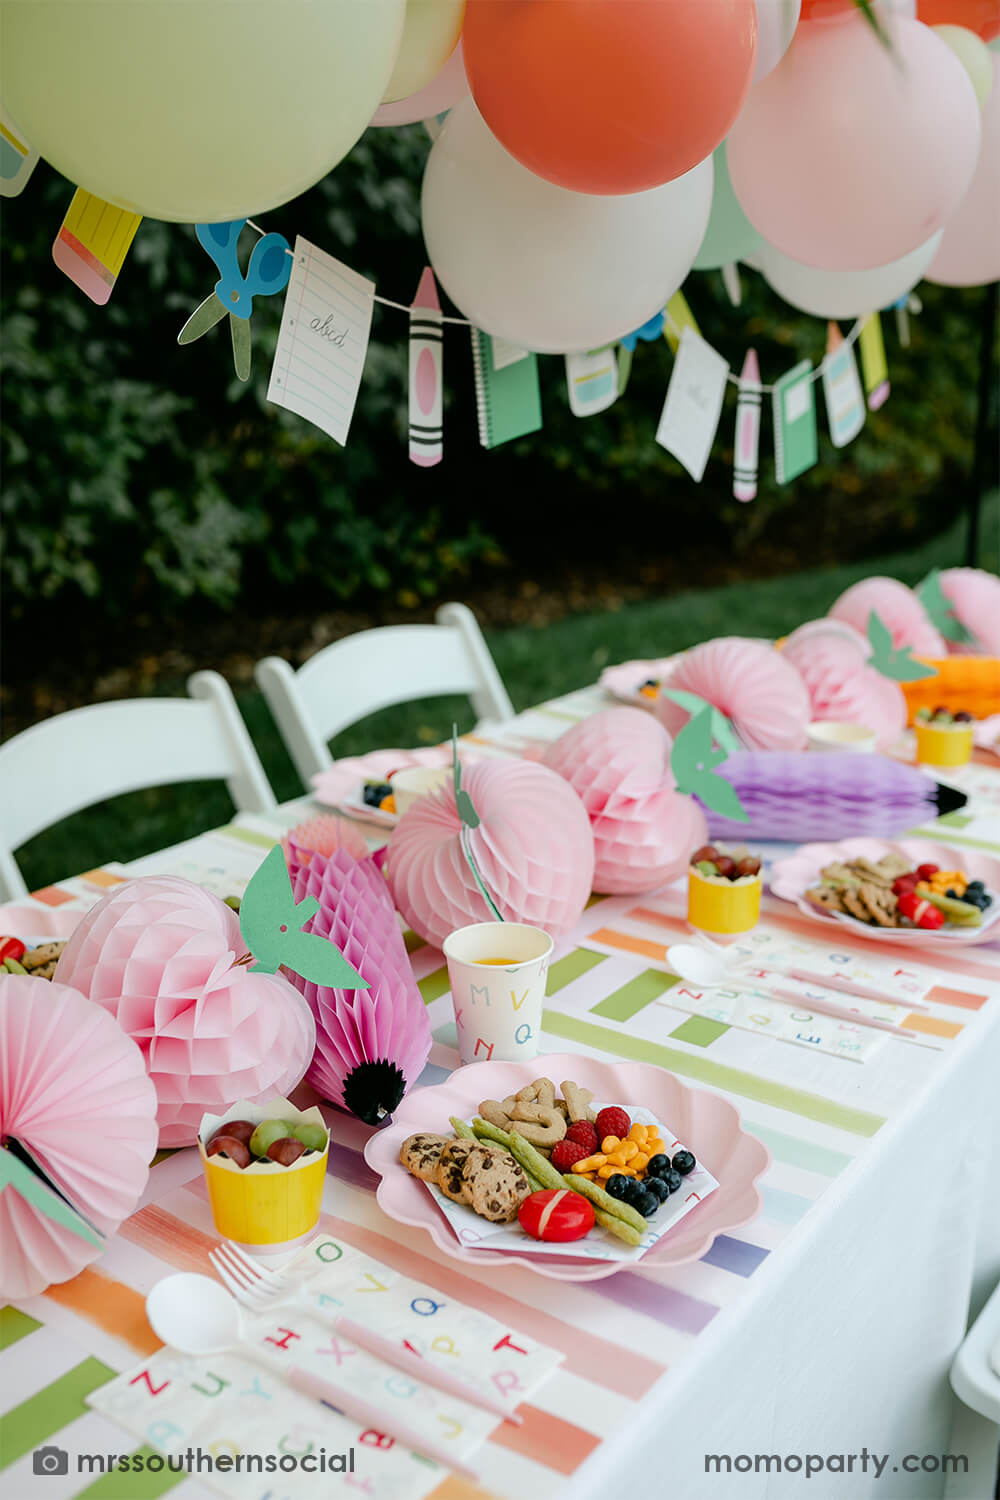 A backyard pastel themed back to school party table set up and decoration featuring Momo Party's back to school themed party goods including back to school party garland, pink apple honeycombs and rainbow pastel pencil honeycombs as the centerpiece, ABC alphabet plates, party cups and napkins. With a pastel themed balloon garland hung above the table, it makes an adorable celebration for kid's first day of school.